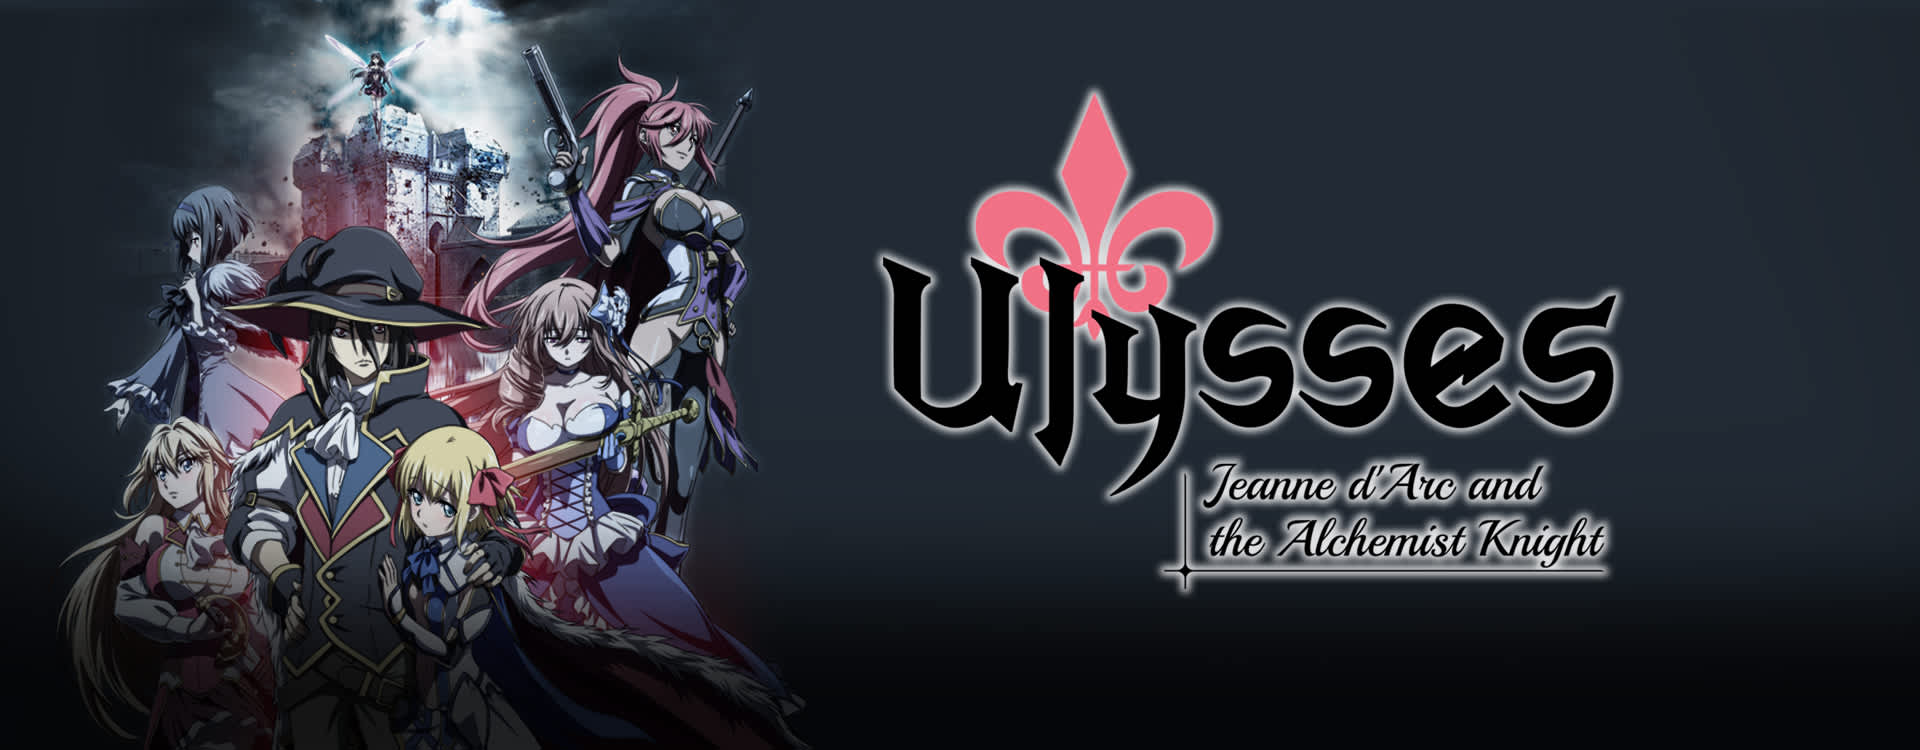 Ulysses: Jeanne d'Arc and the Alchemist Knight (TV Series 2018